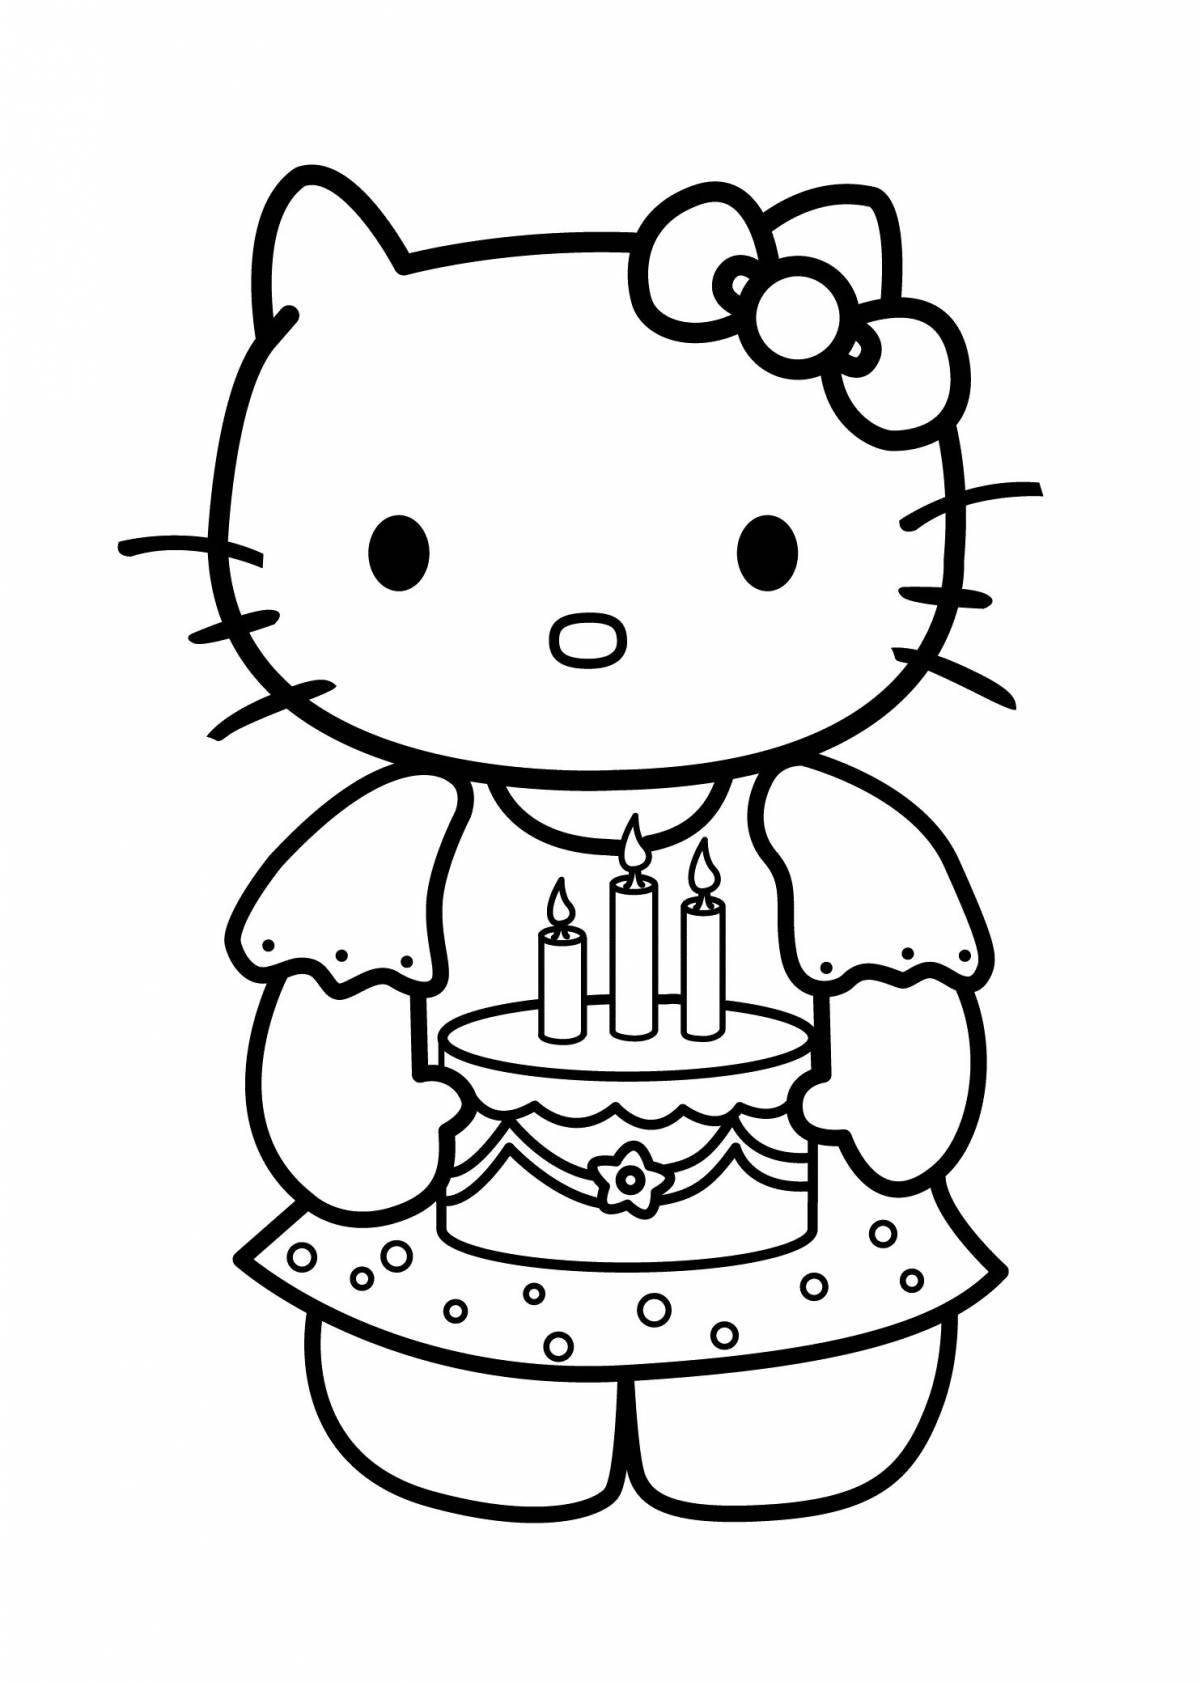 Bright hello kitty doll coloring book